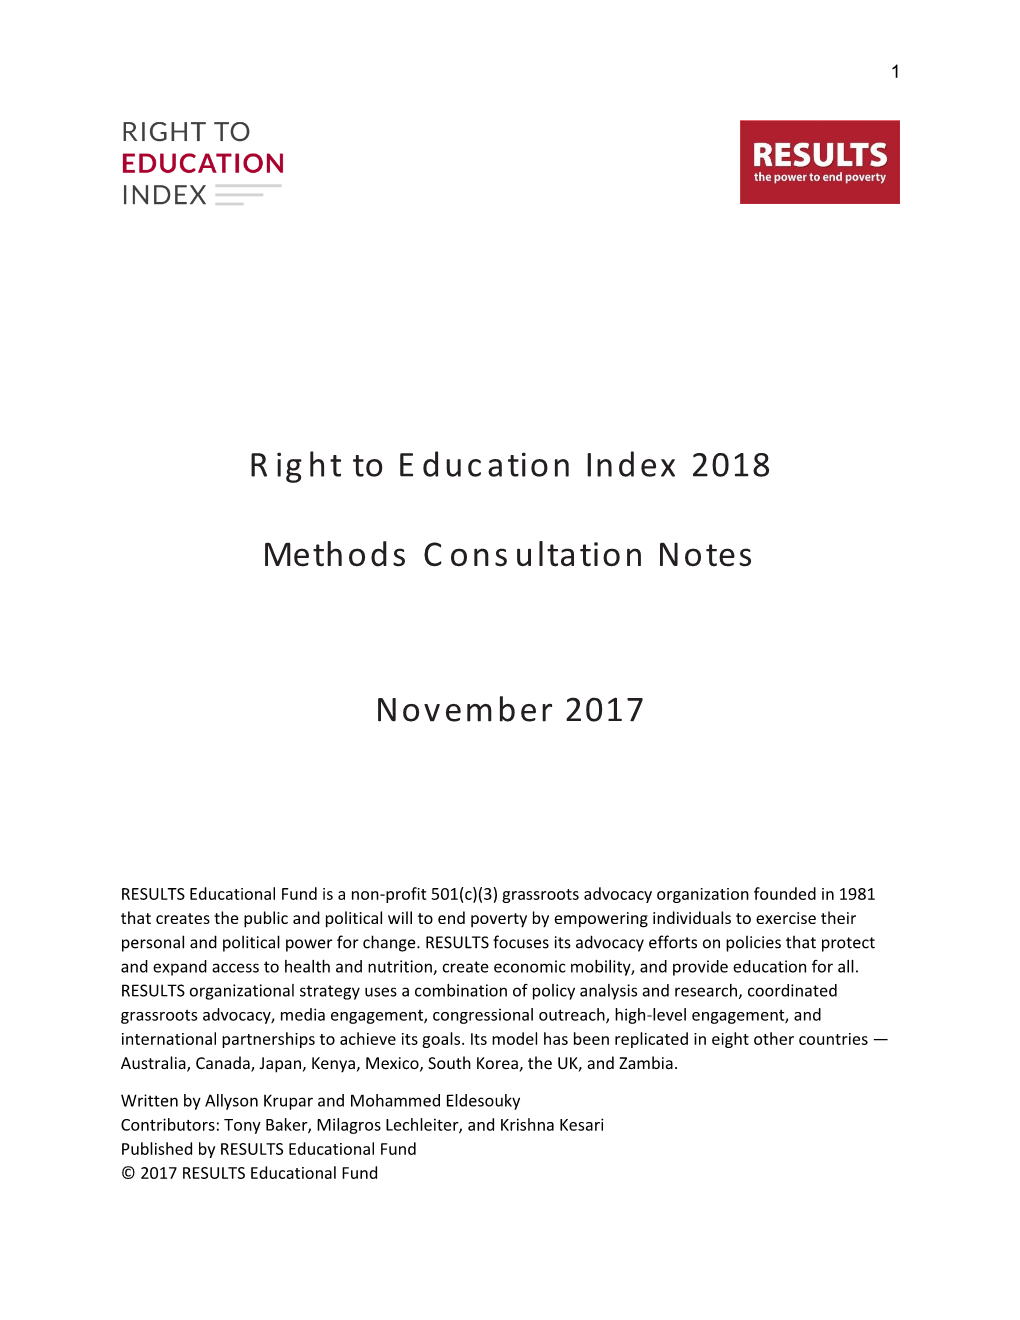 Right to Education Index 2018 Methods Consultation Notes